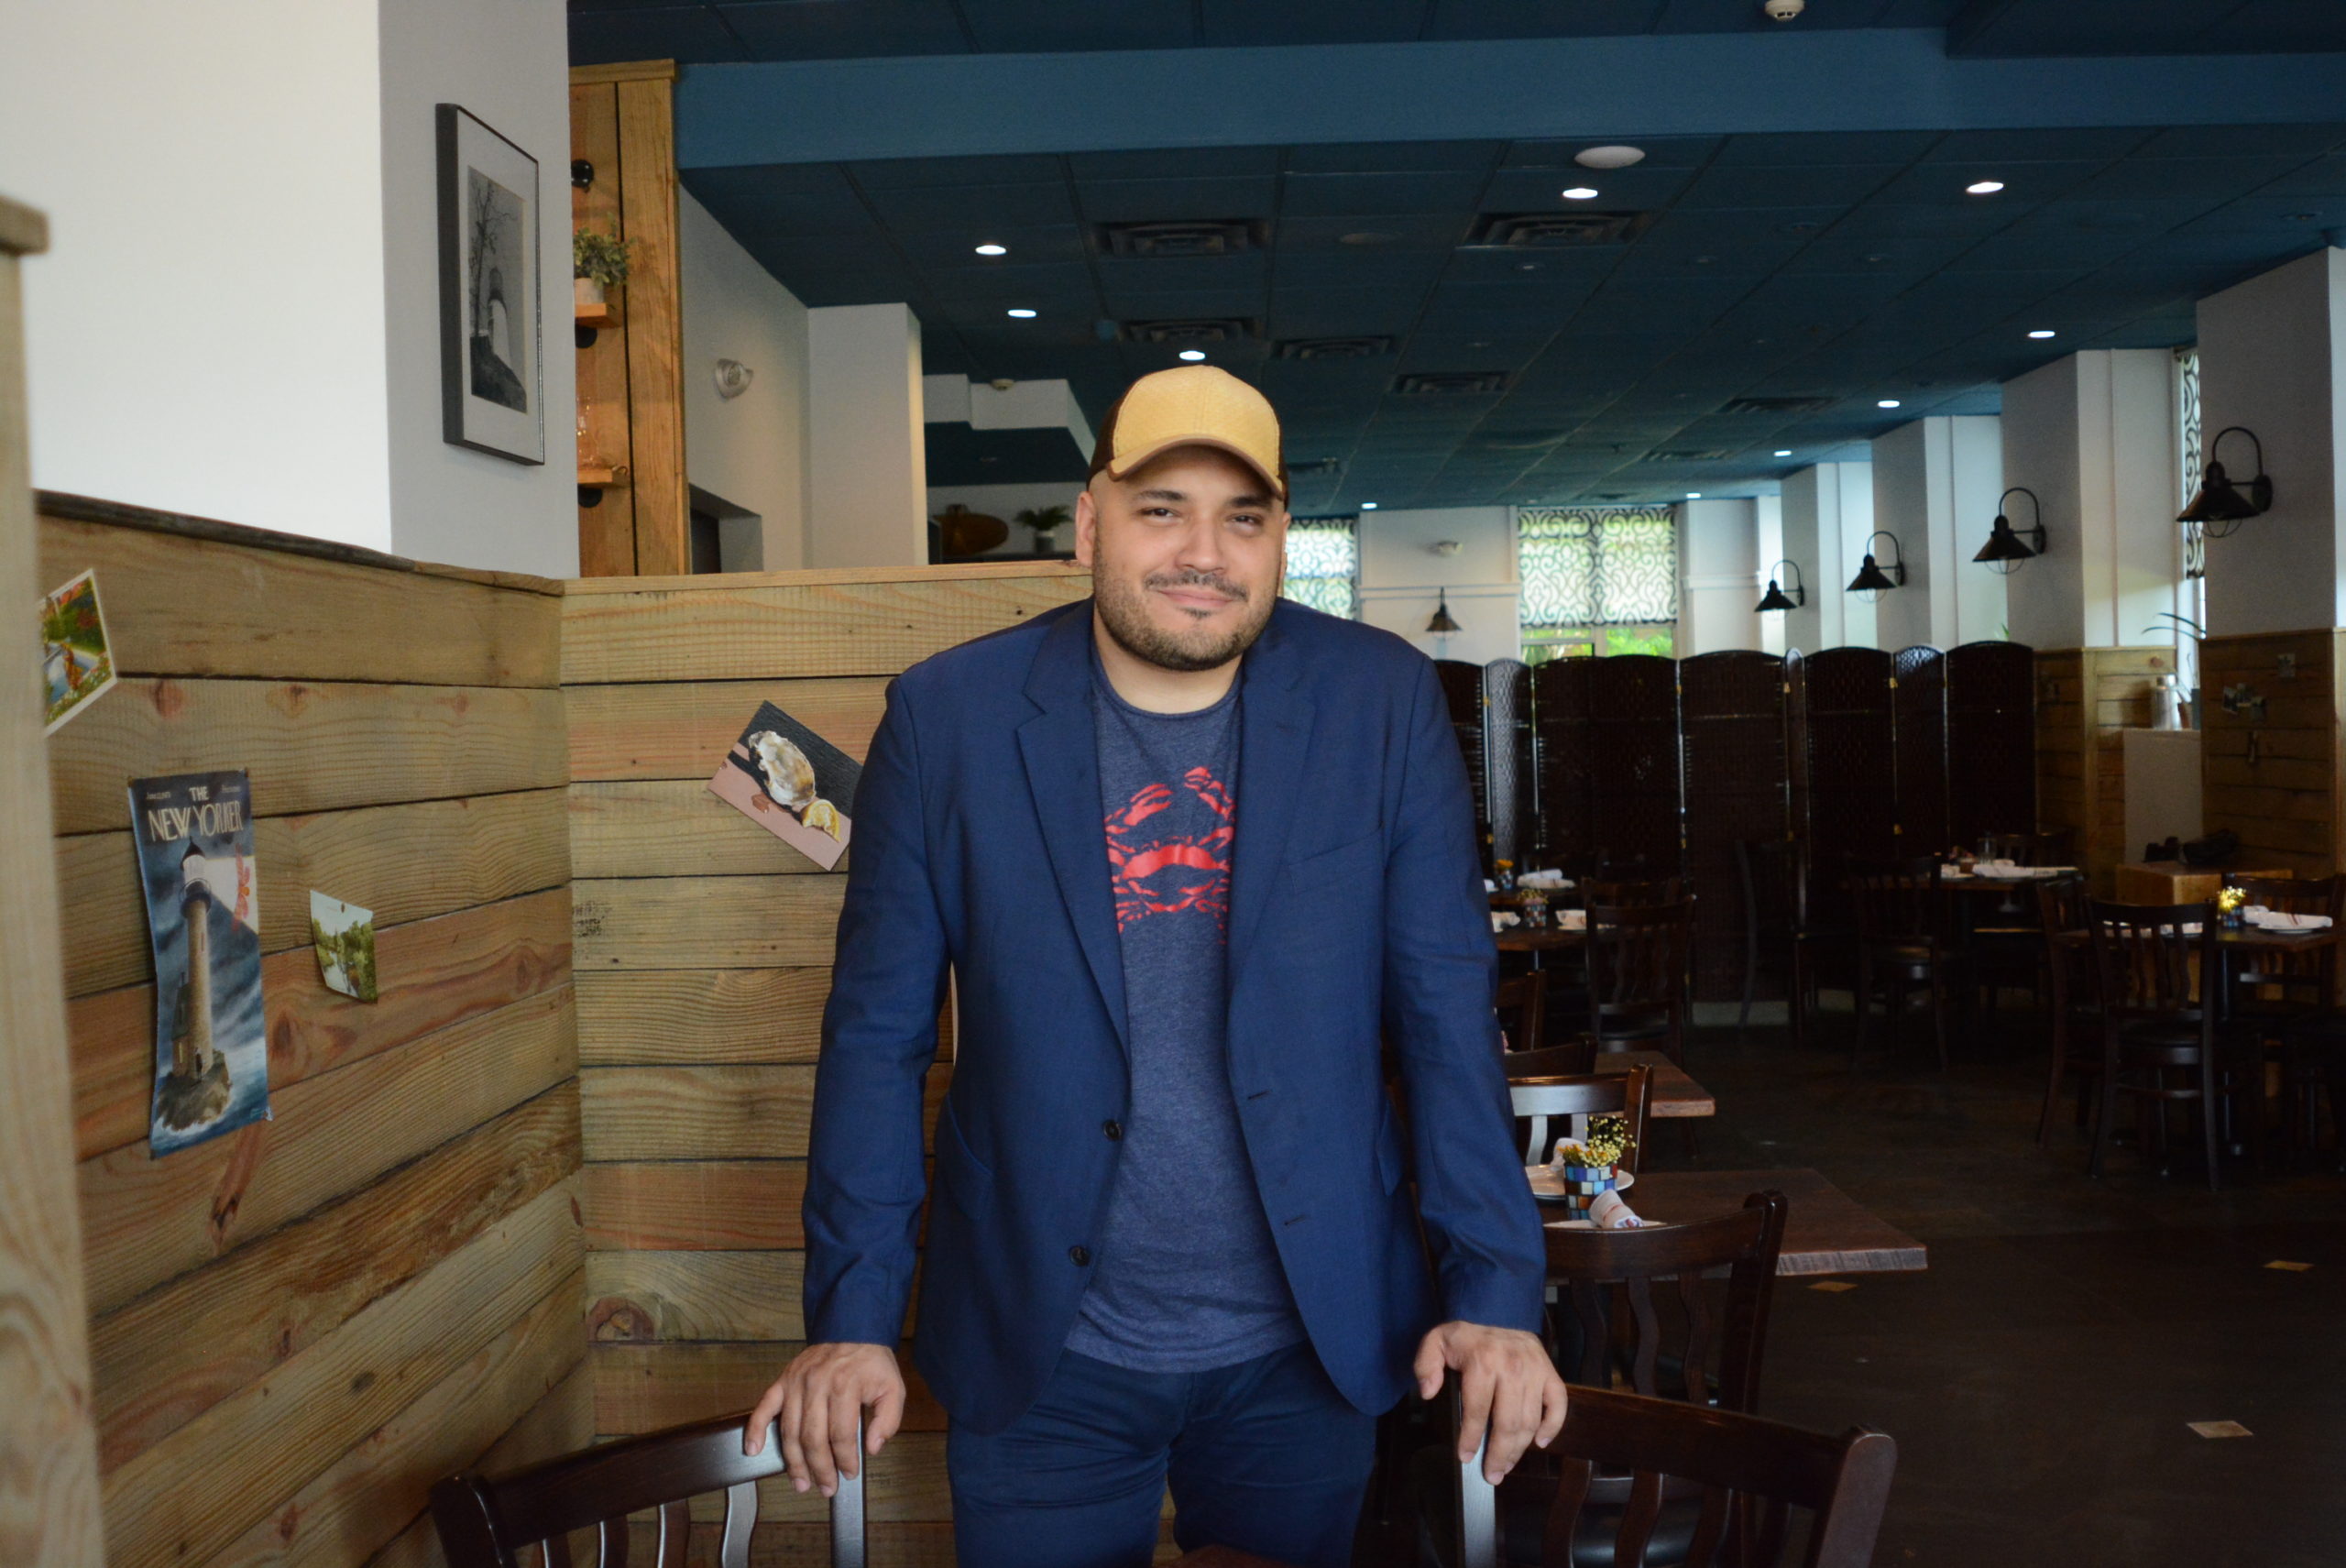 Barney Villalona, the new manager of Element Seafood, said he hopes to add to a quality seafood restaurant. (Photo by Janelle Clausen)